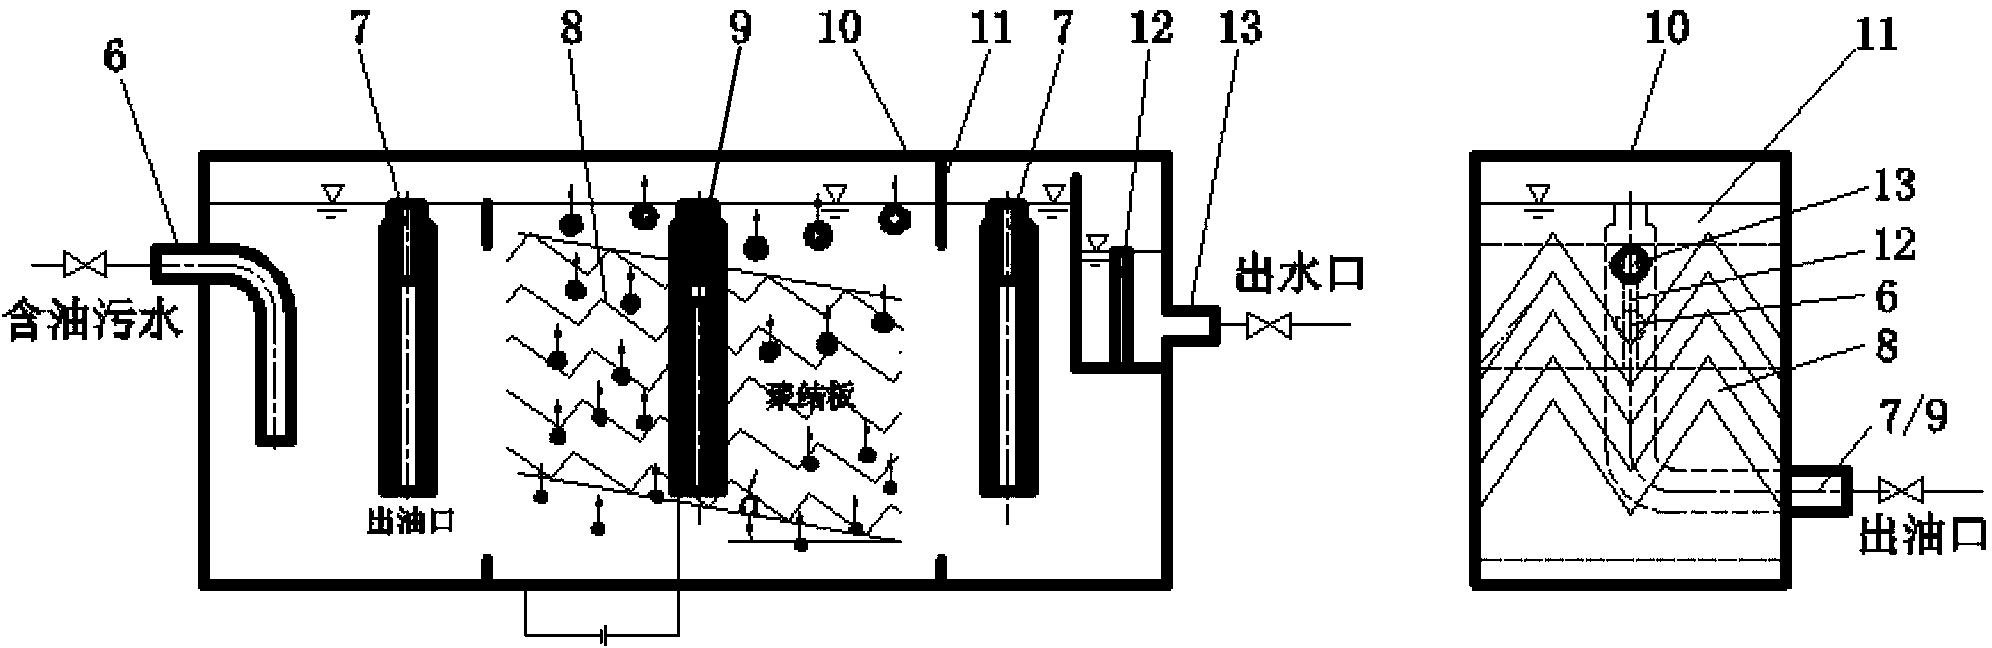 Physical demulsifying and coalescing and oil-water separating method for oil-water emulsion under micro-electric field effect